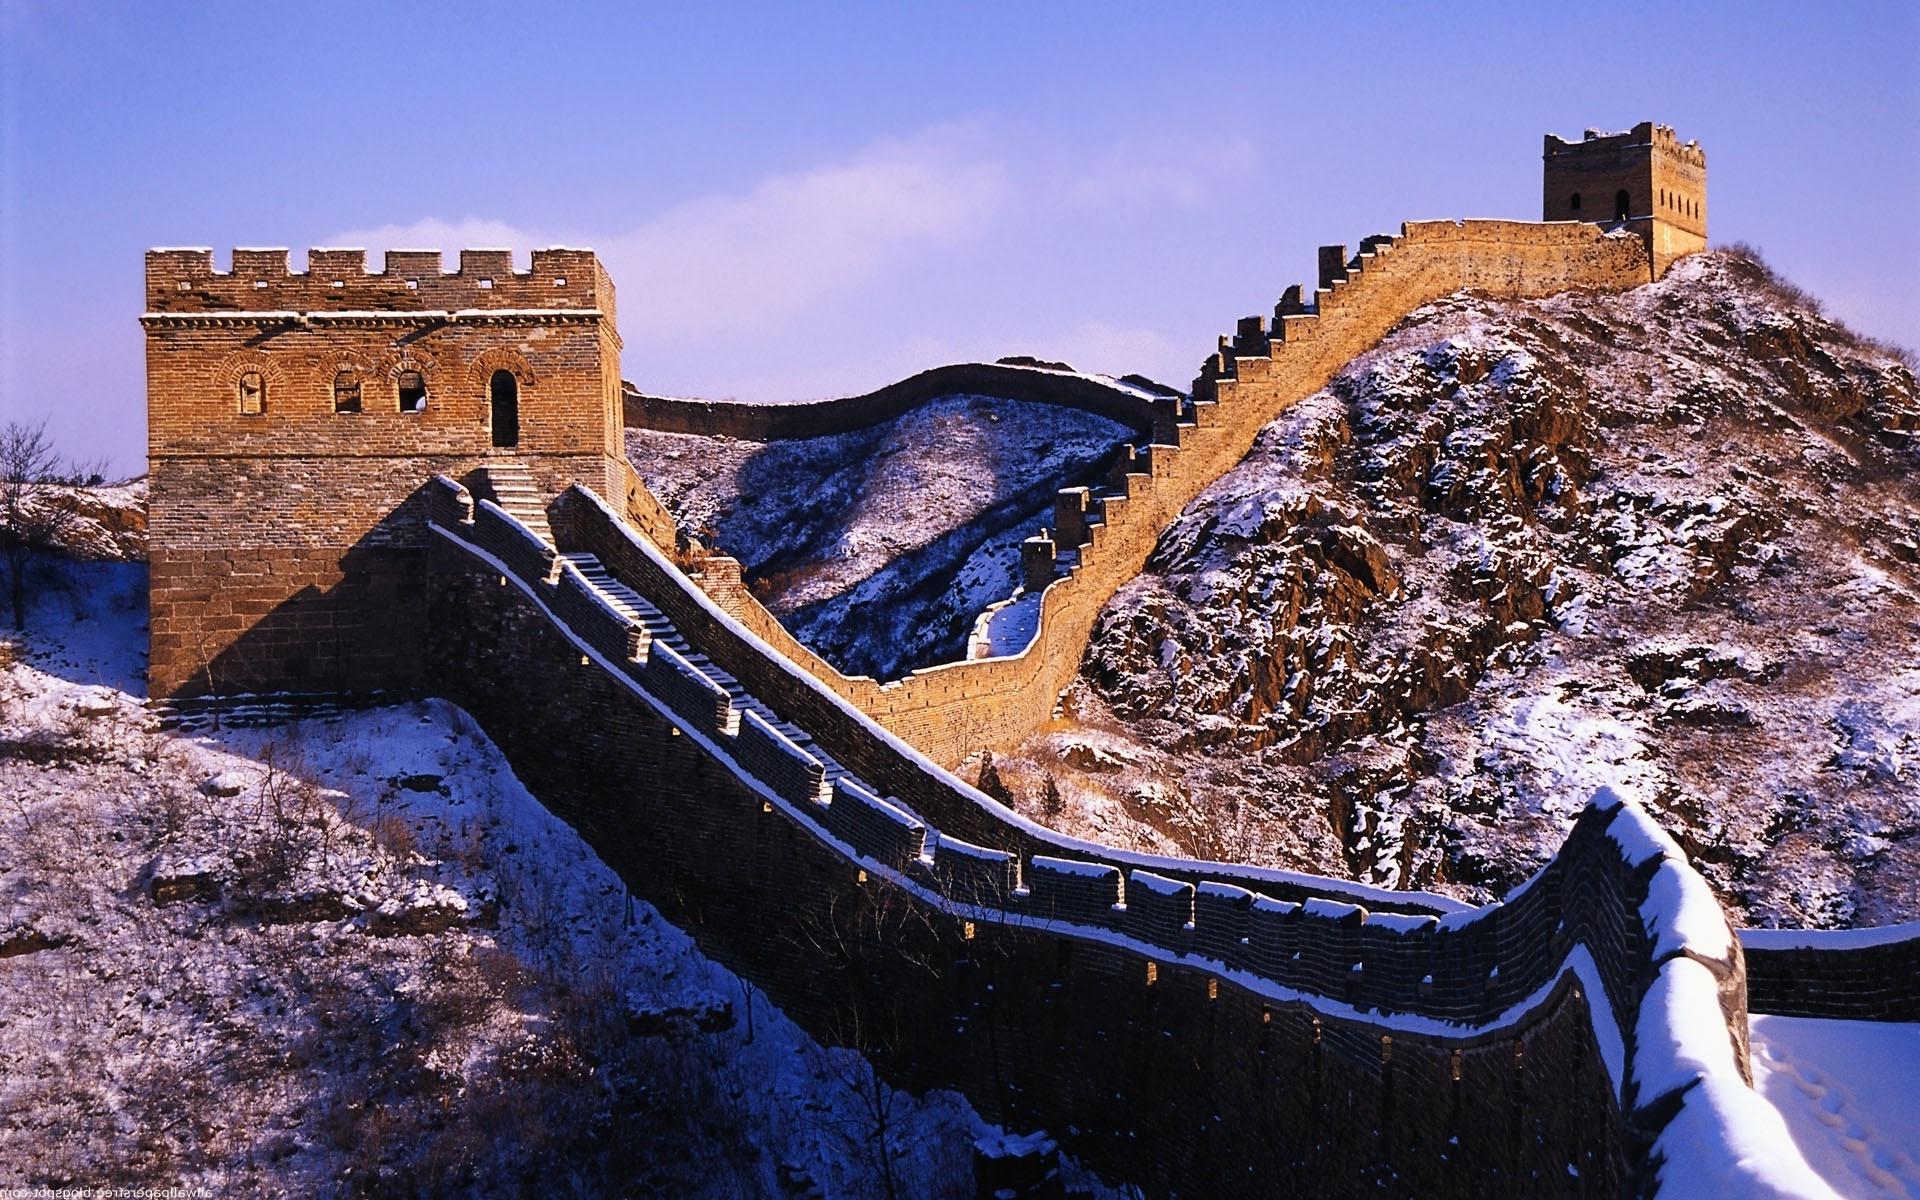 Top Rated High HD Quality Great Wall Of China Image